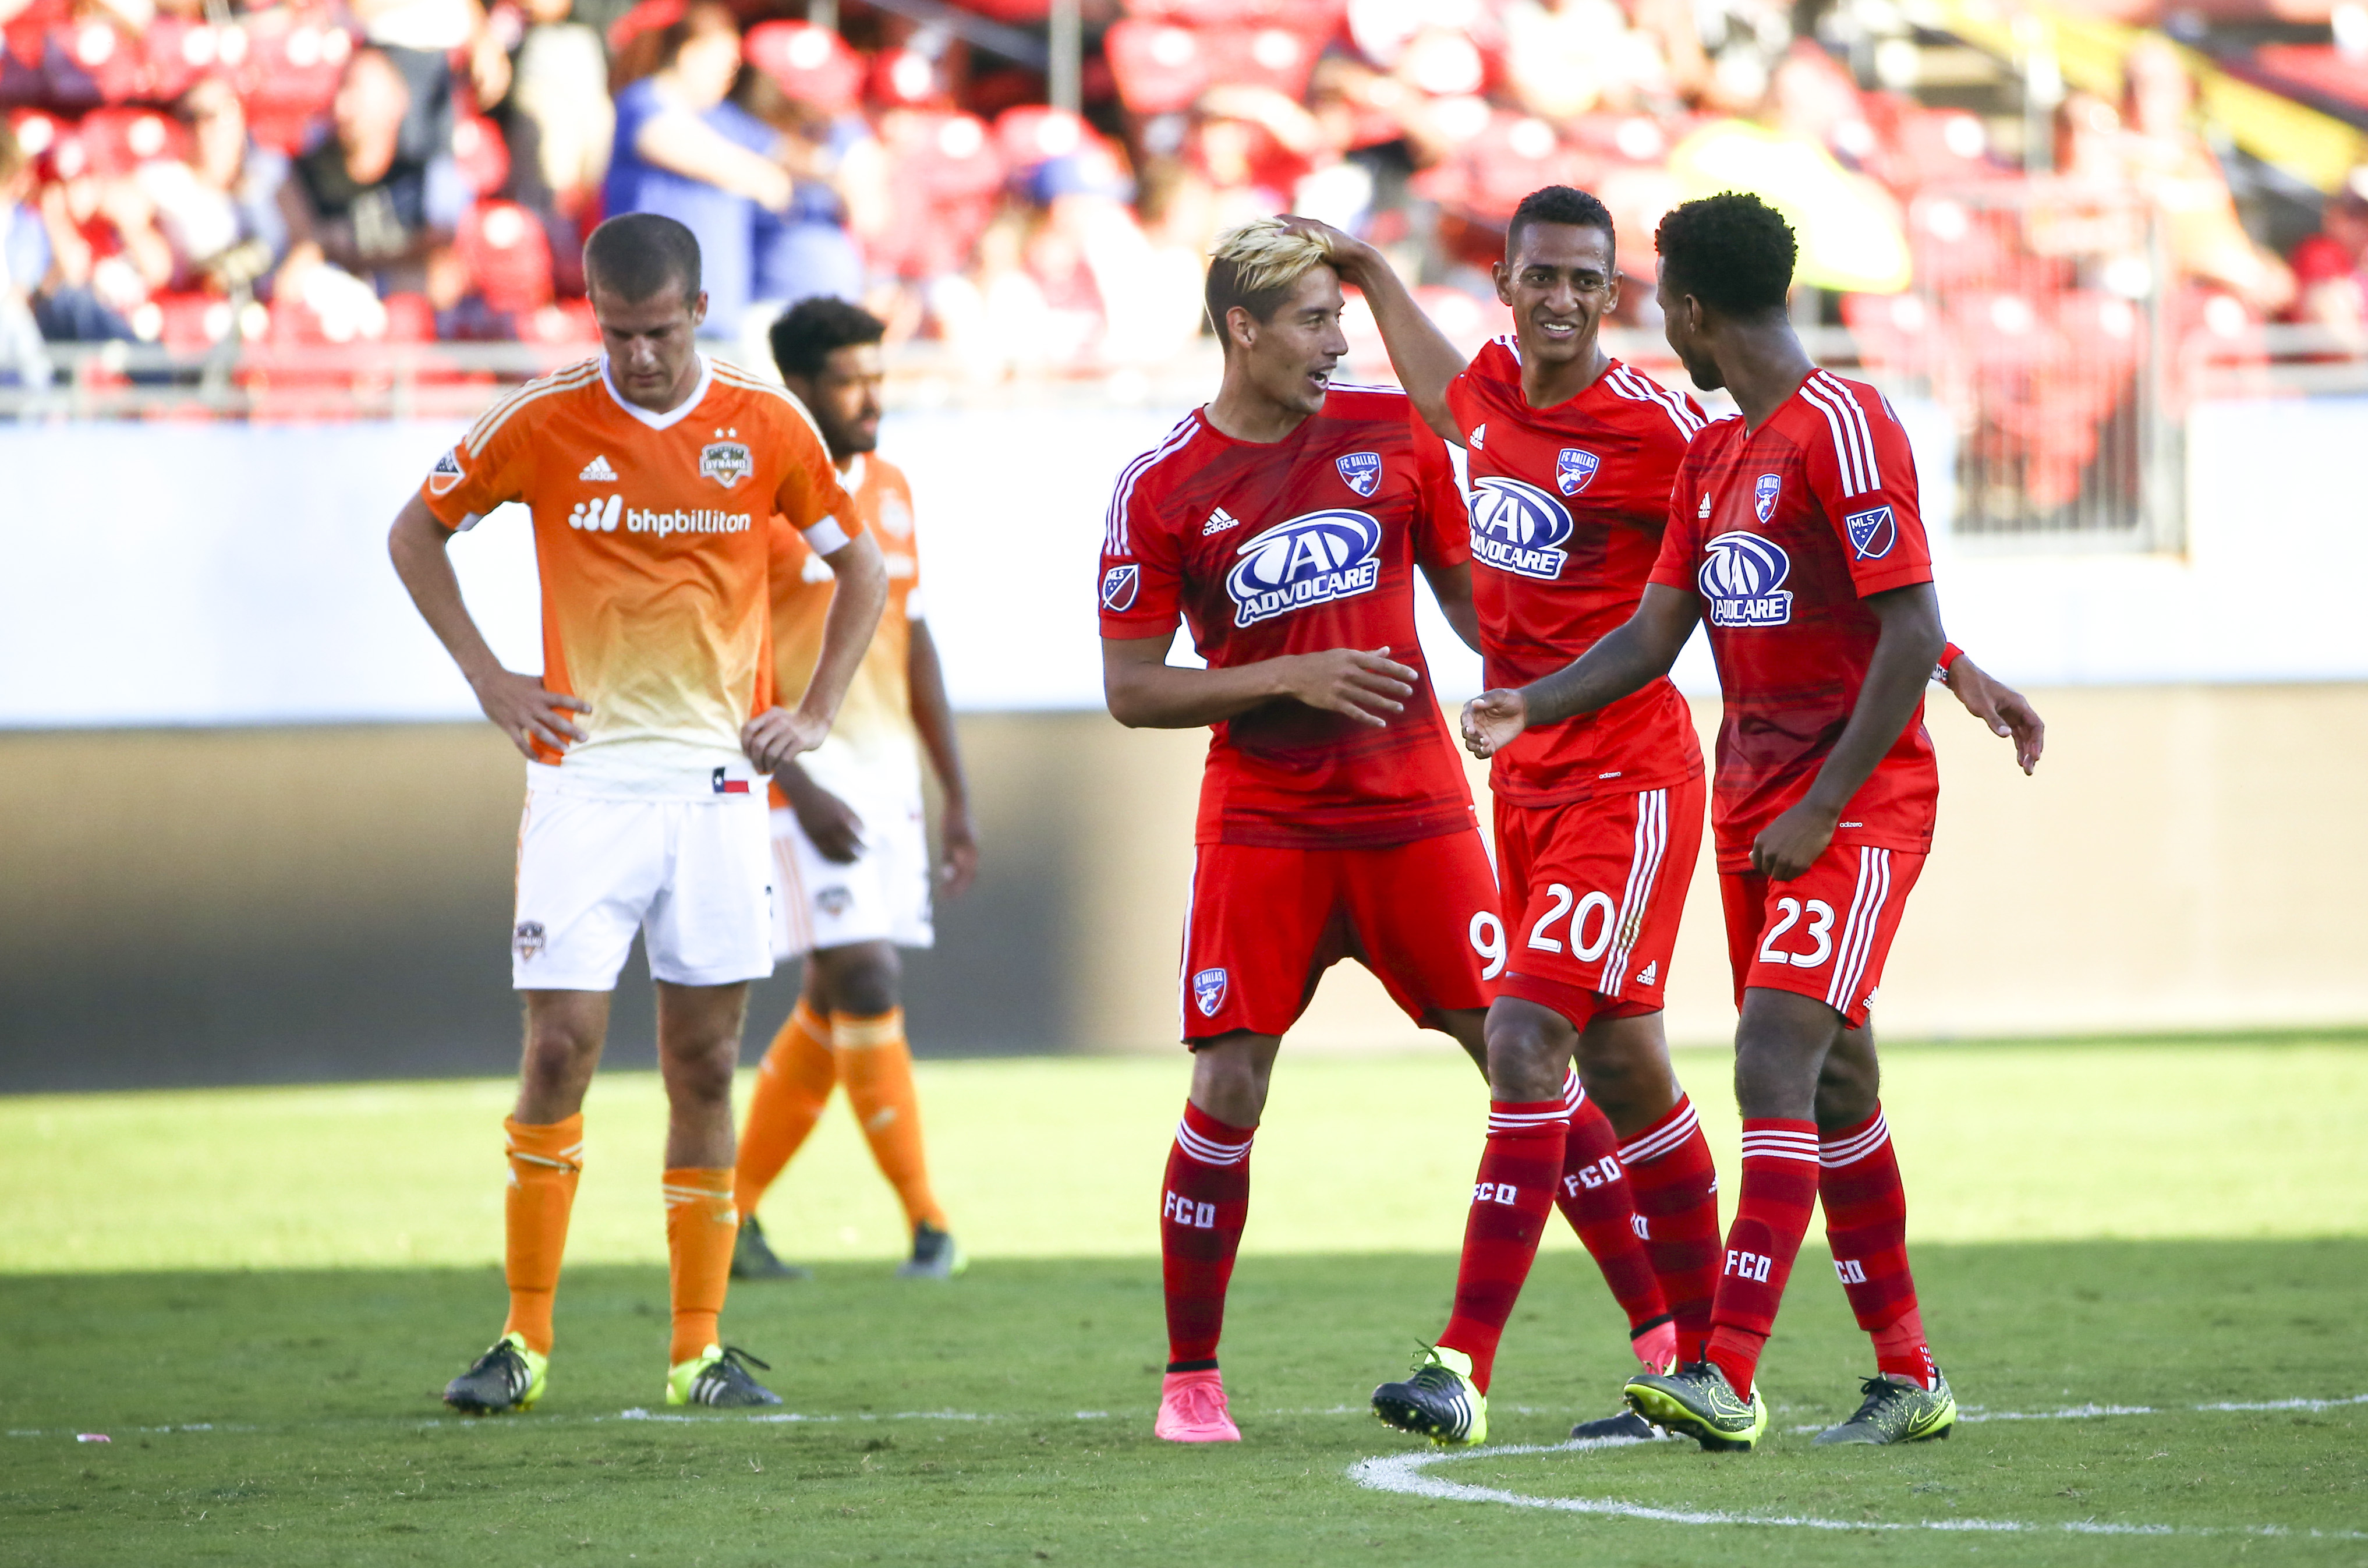 David Texeira (9 in red) was one of two FC Dallas players that scored bar-down goals against the Dynamo.